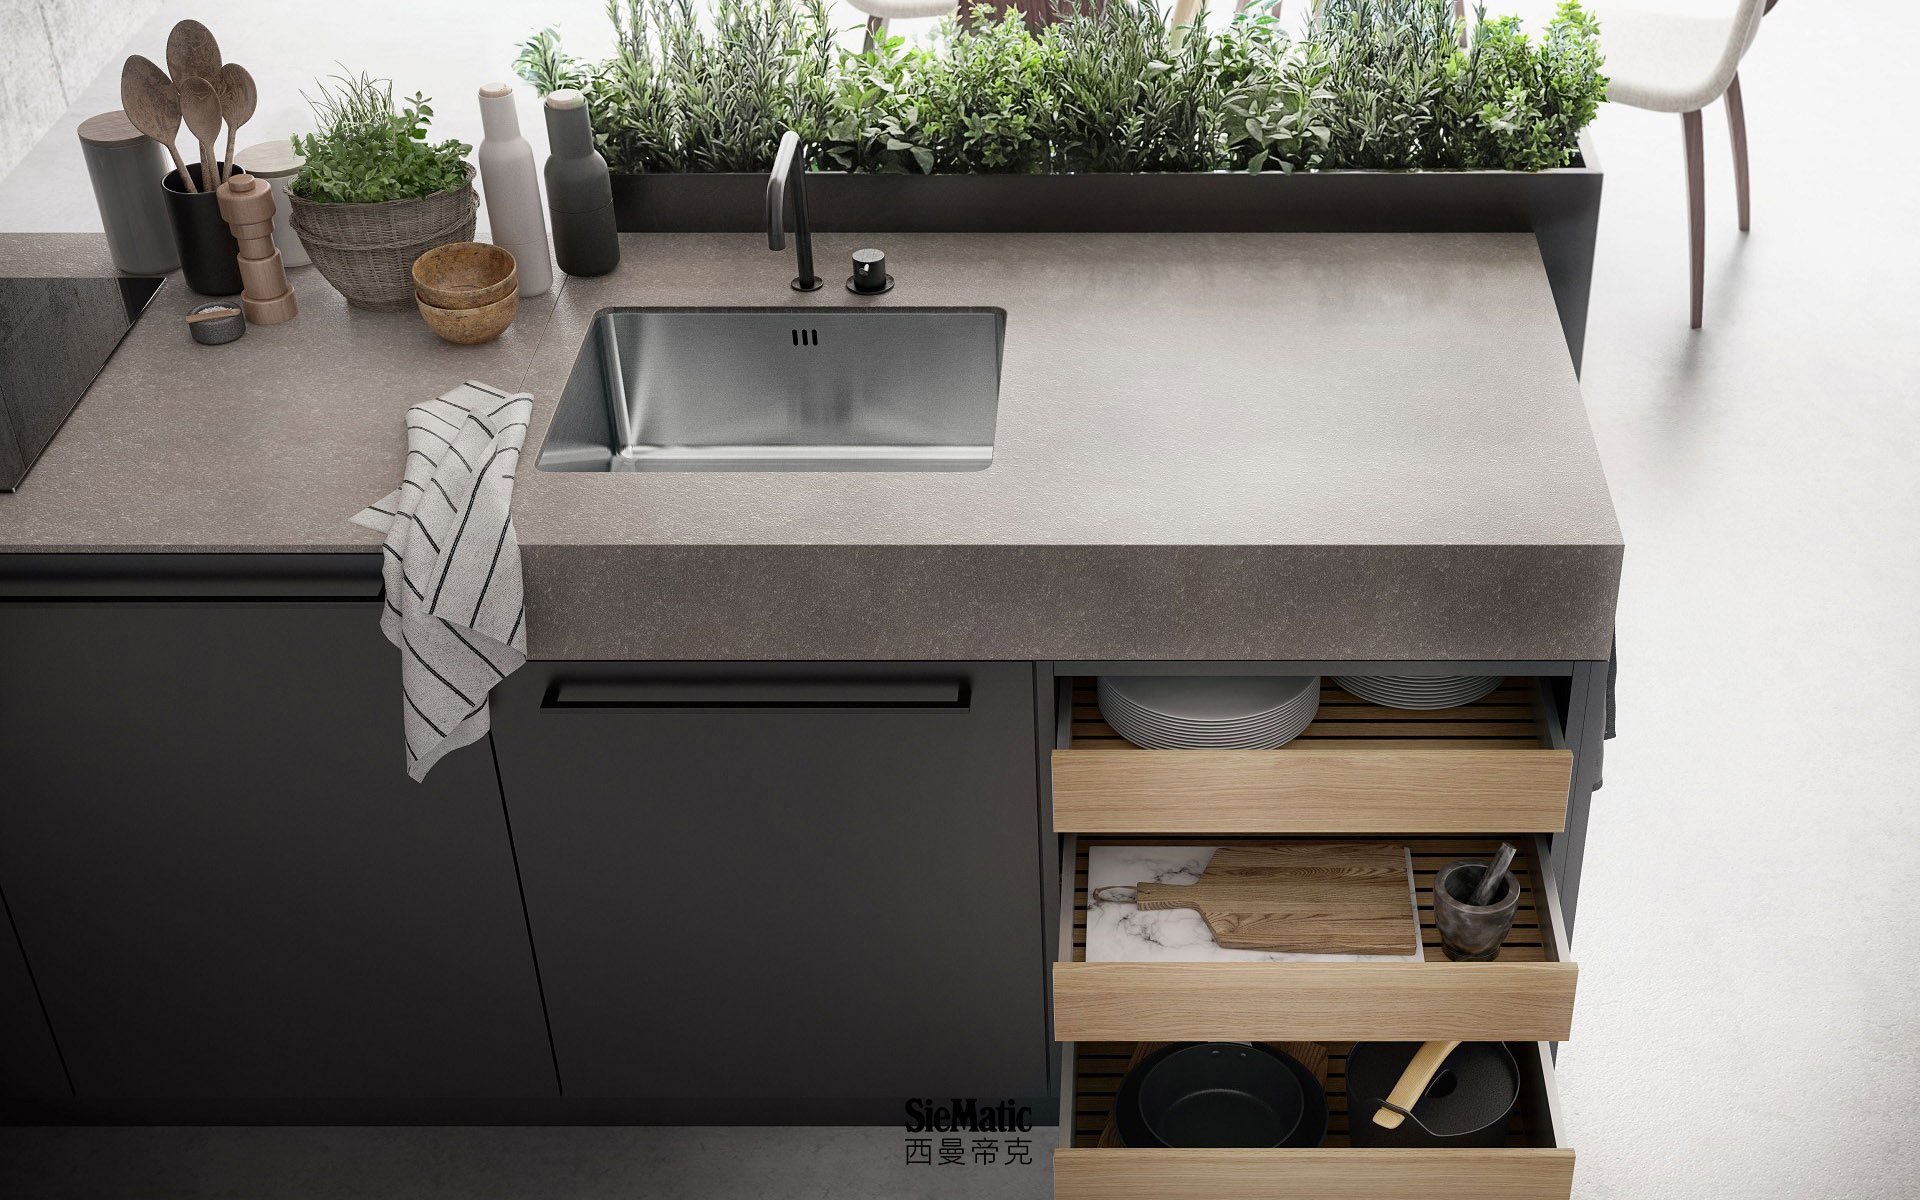 Kitchen island with SieMatic StoneDesign countertop and herb garden from the Urban style collection